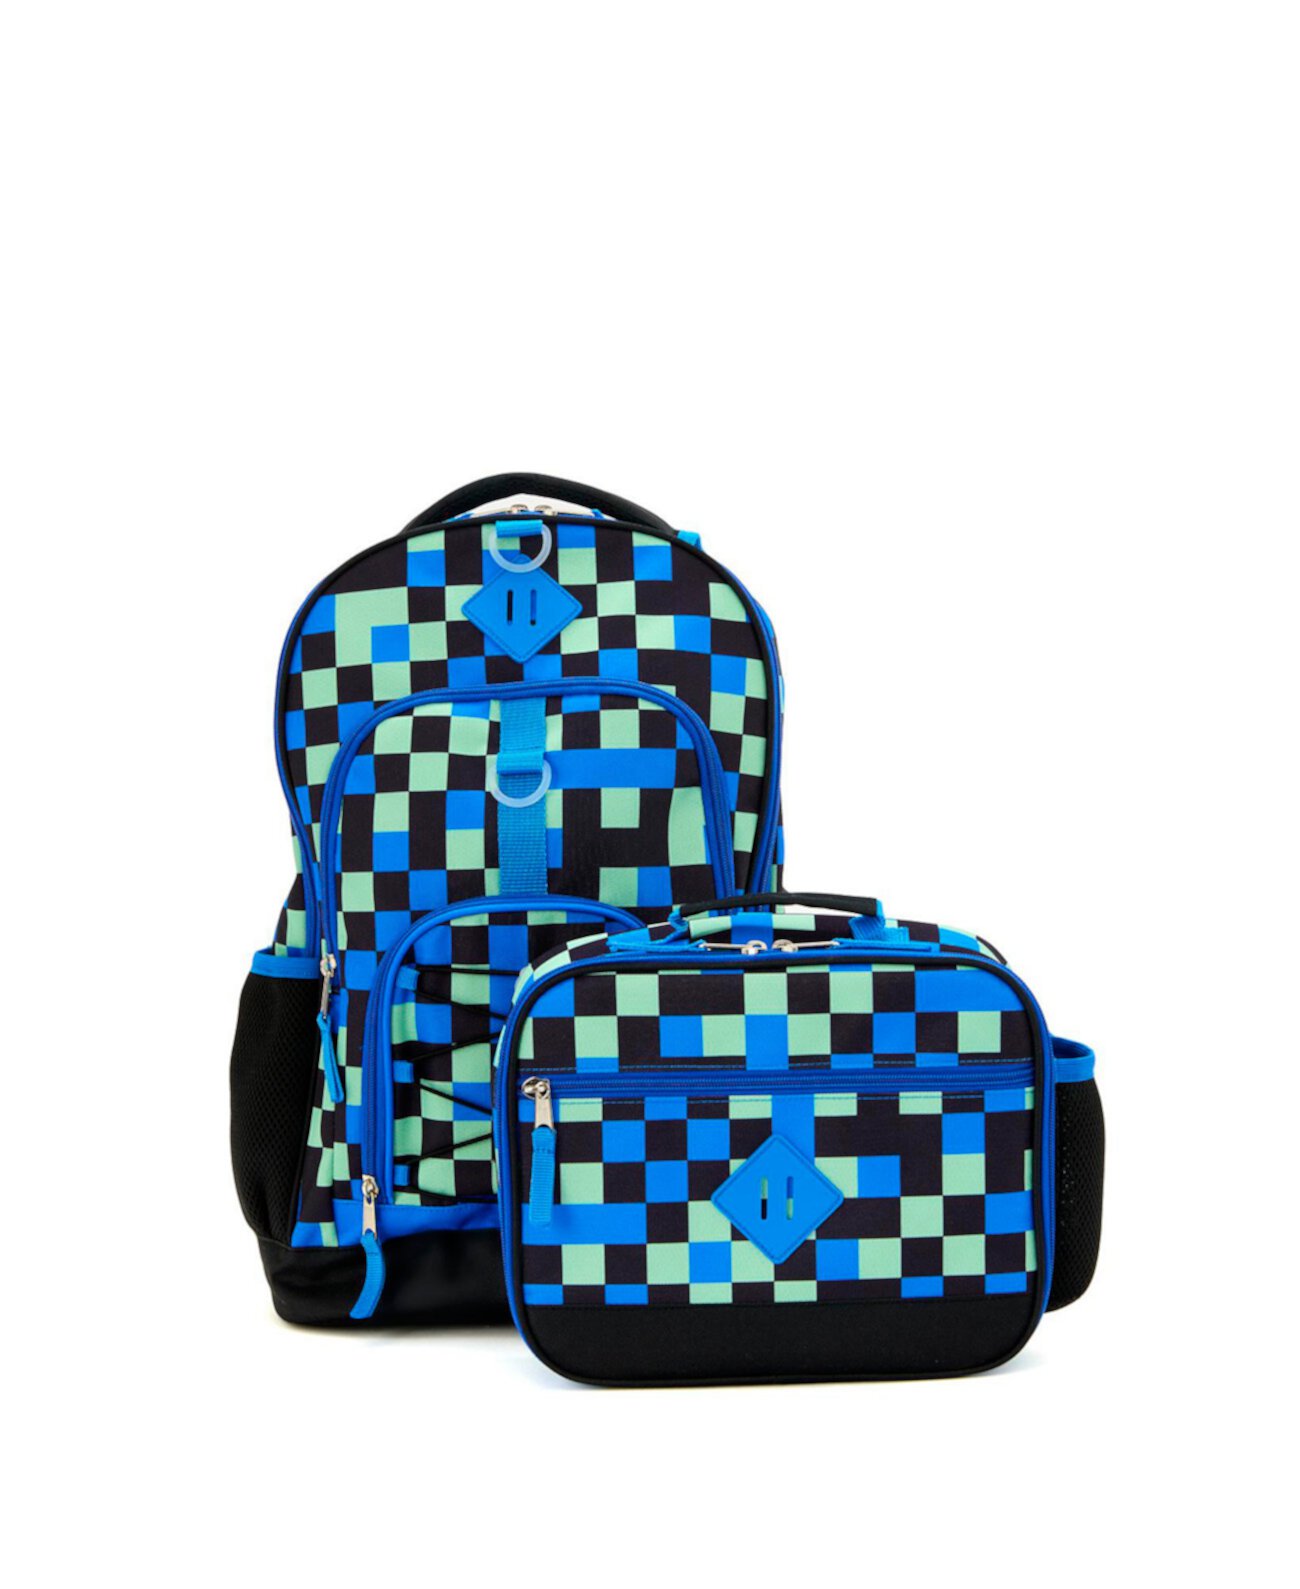 Boy's Checkered Lunchbox Backpack Set InMocean